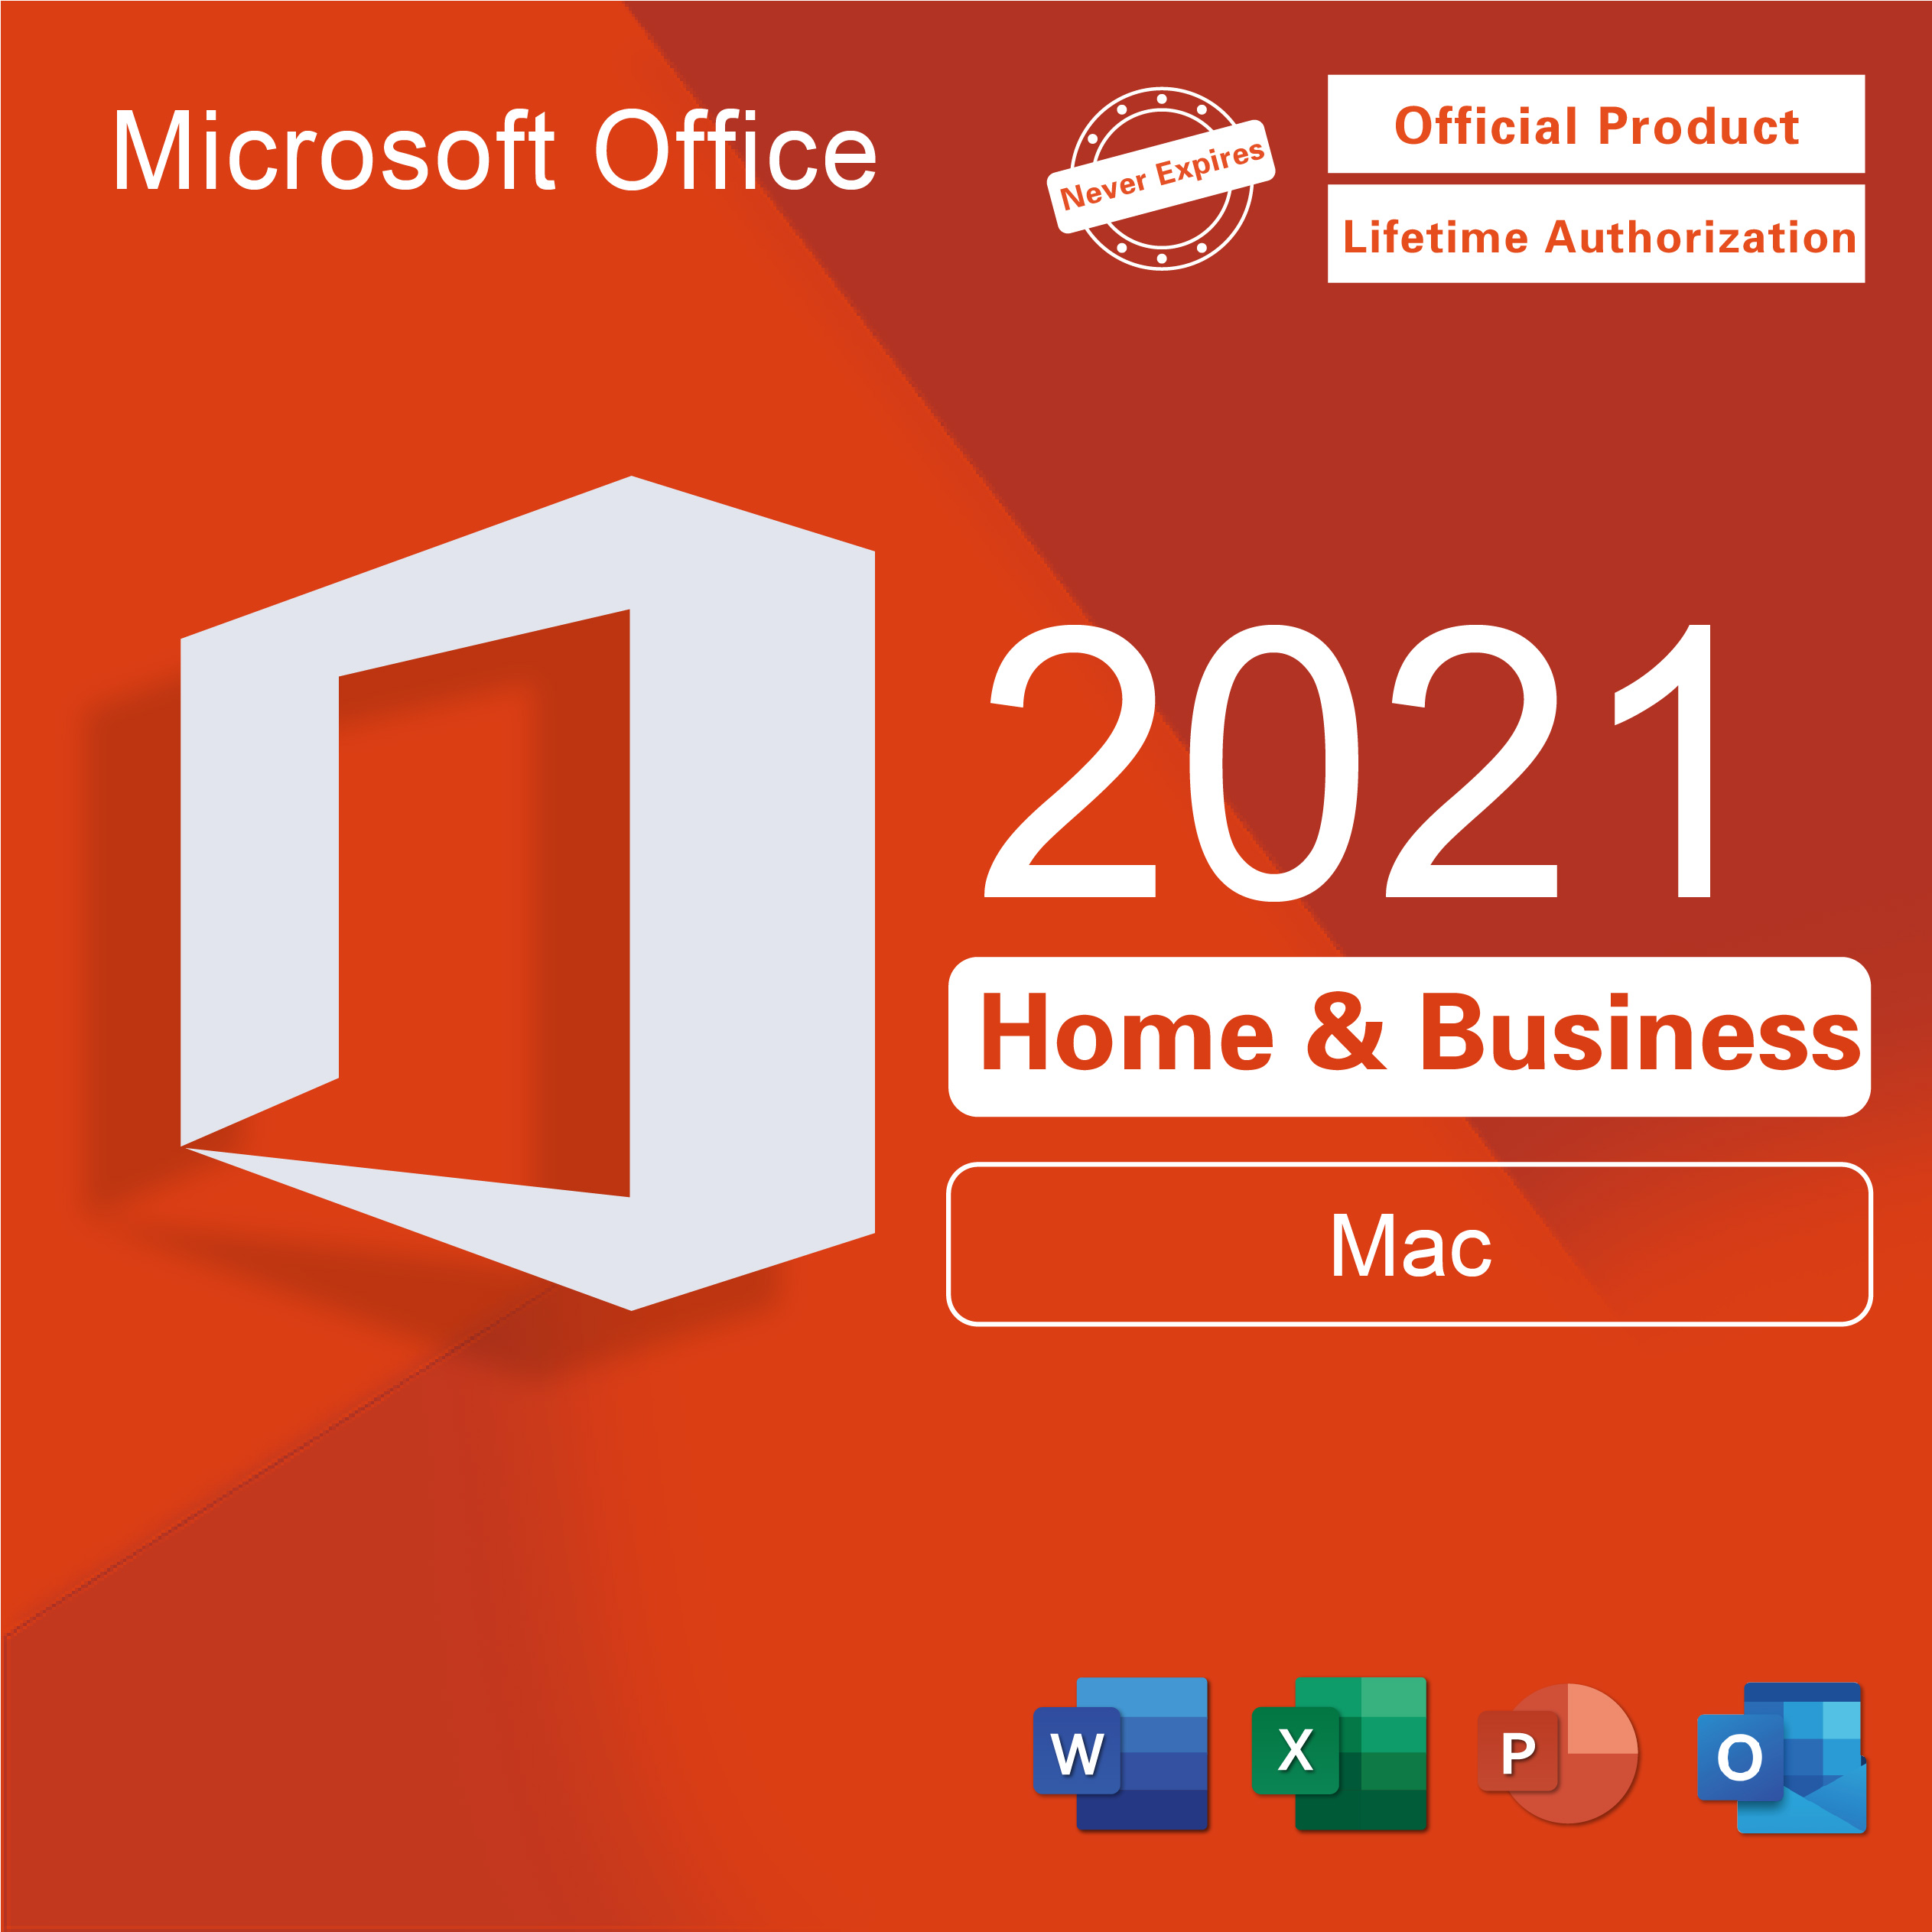 Microsoft Office 2021 Home & Business For Mac